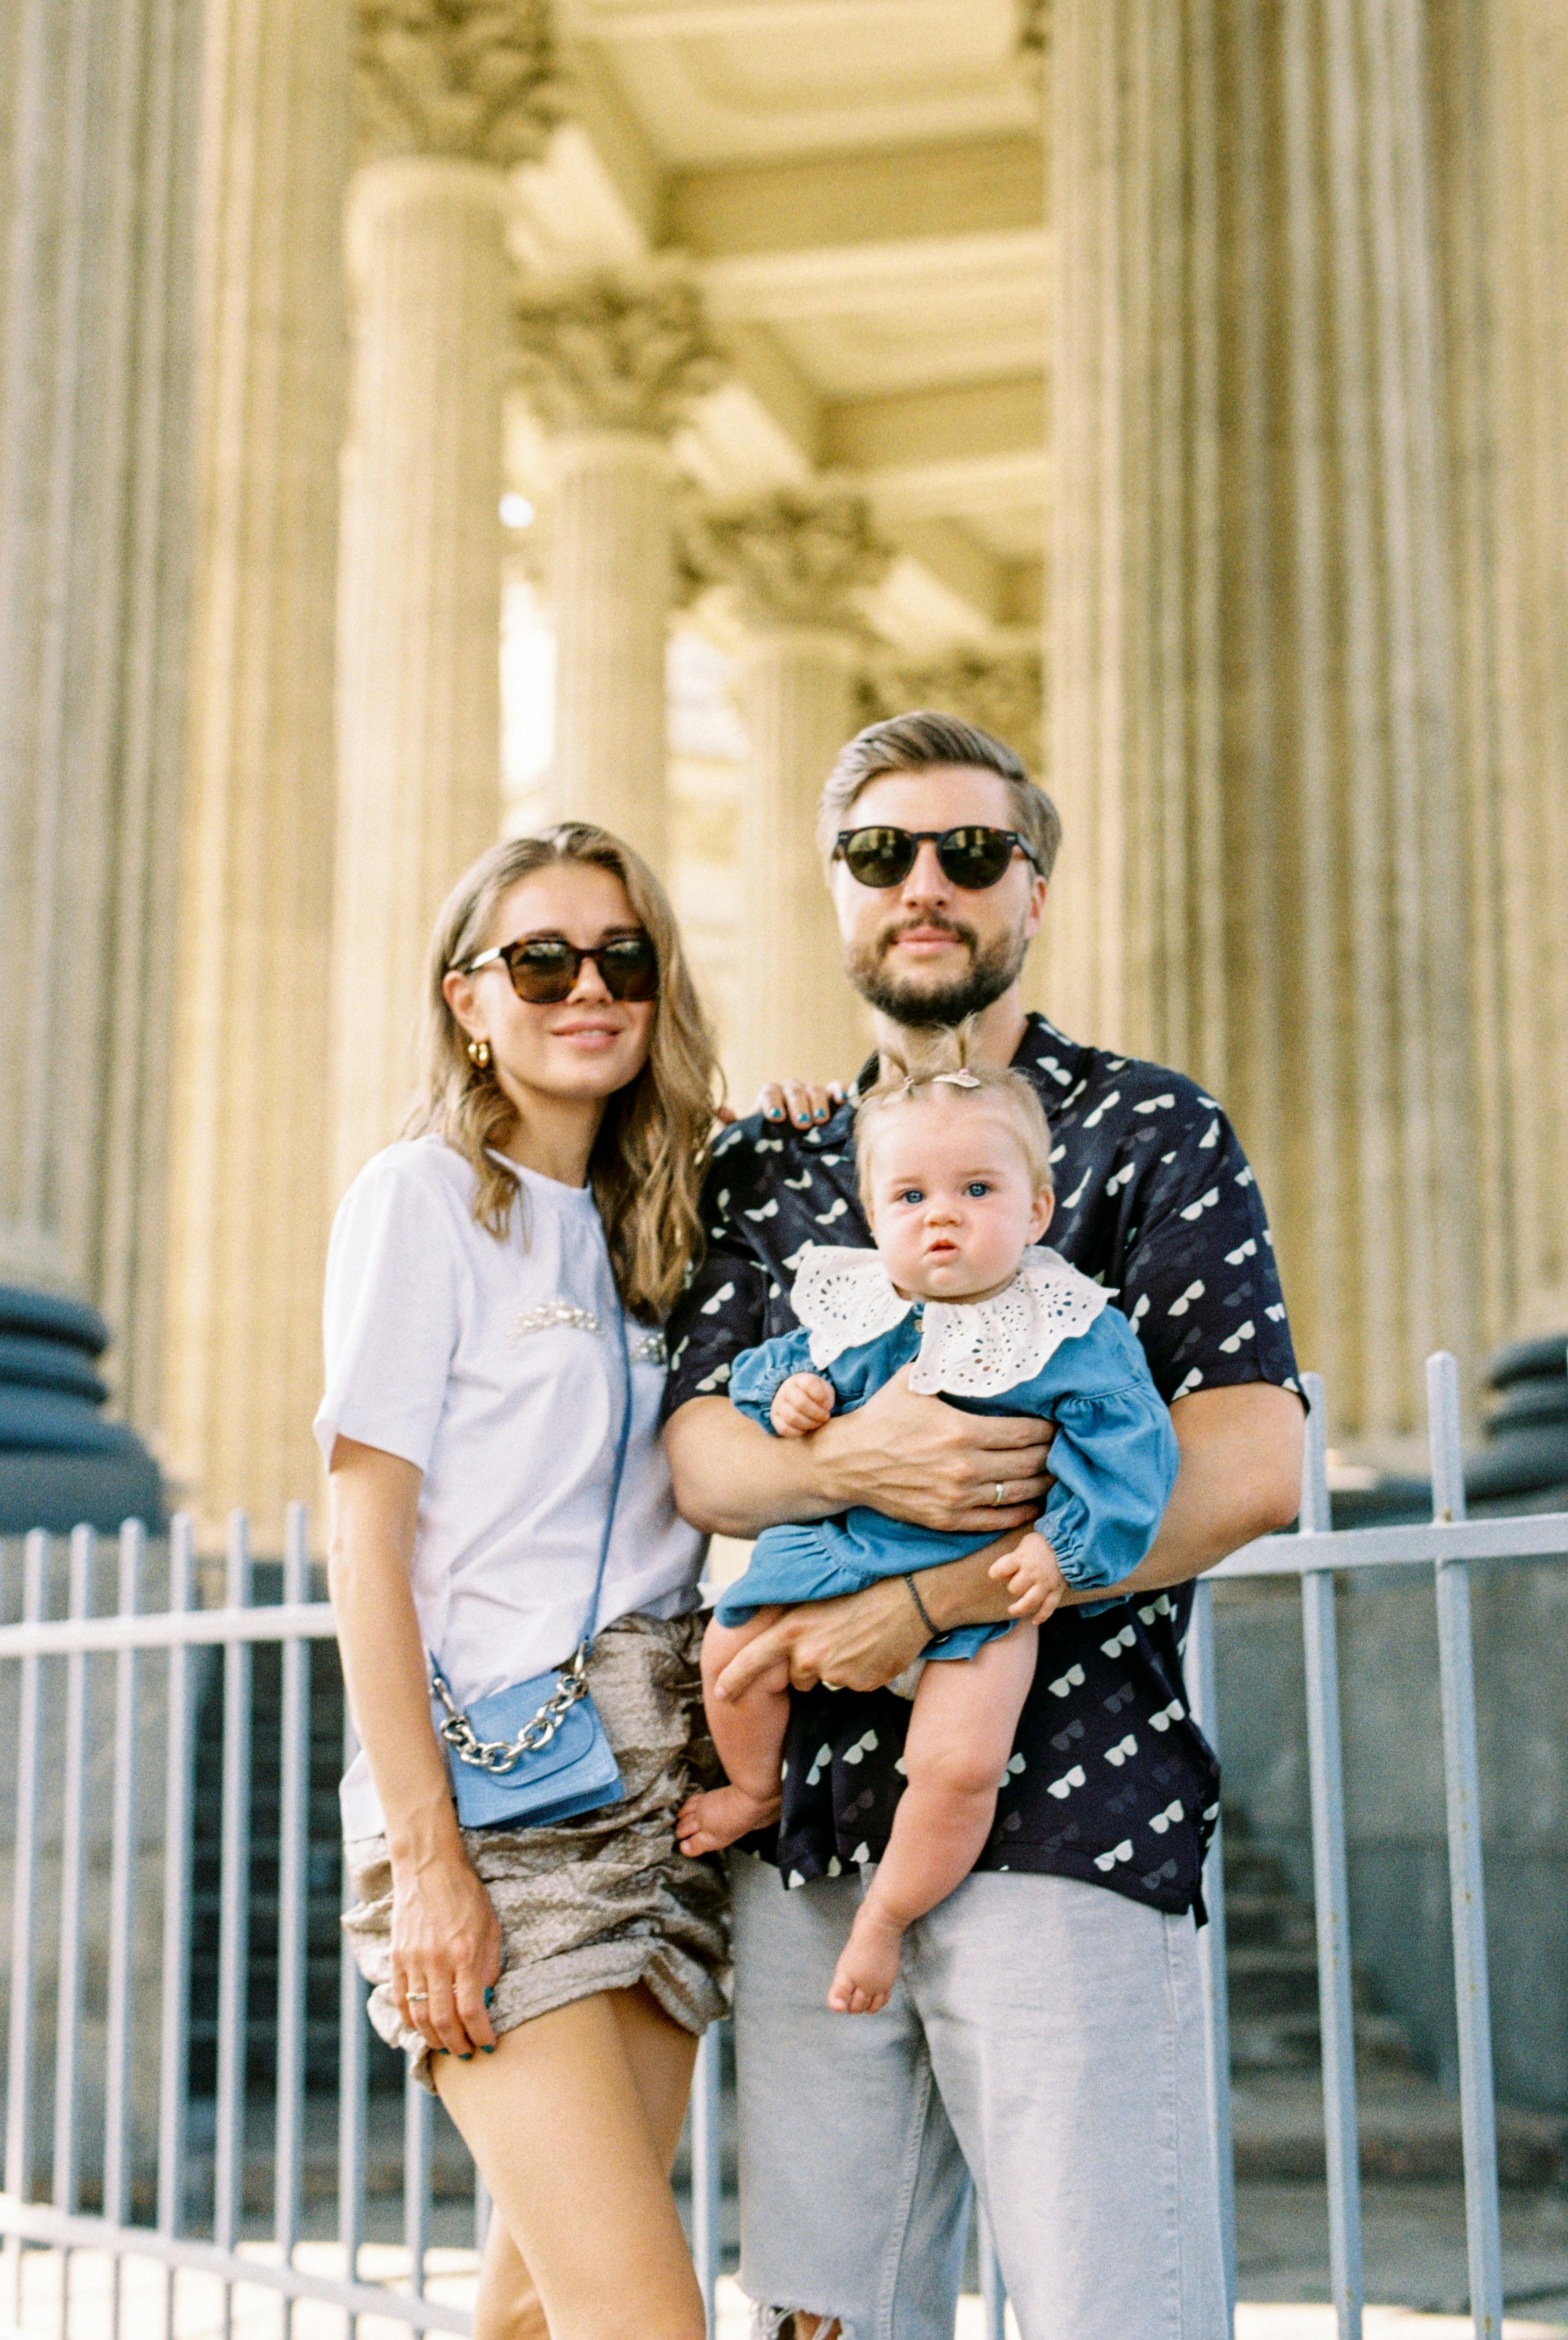 A young couple with their child | Source: Pexels